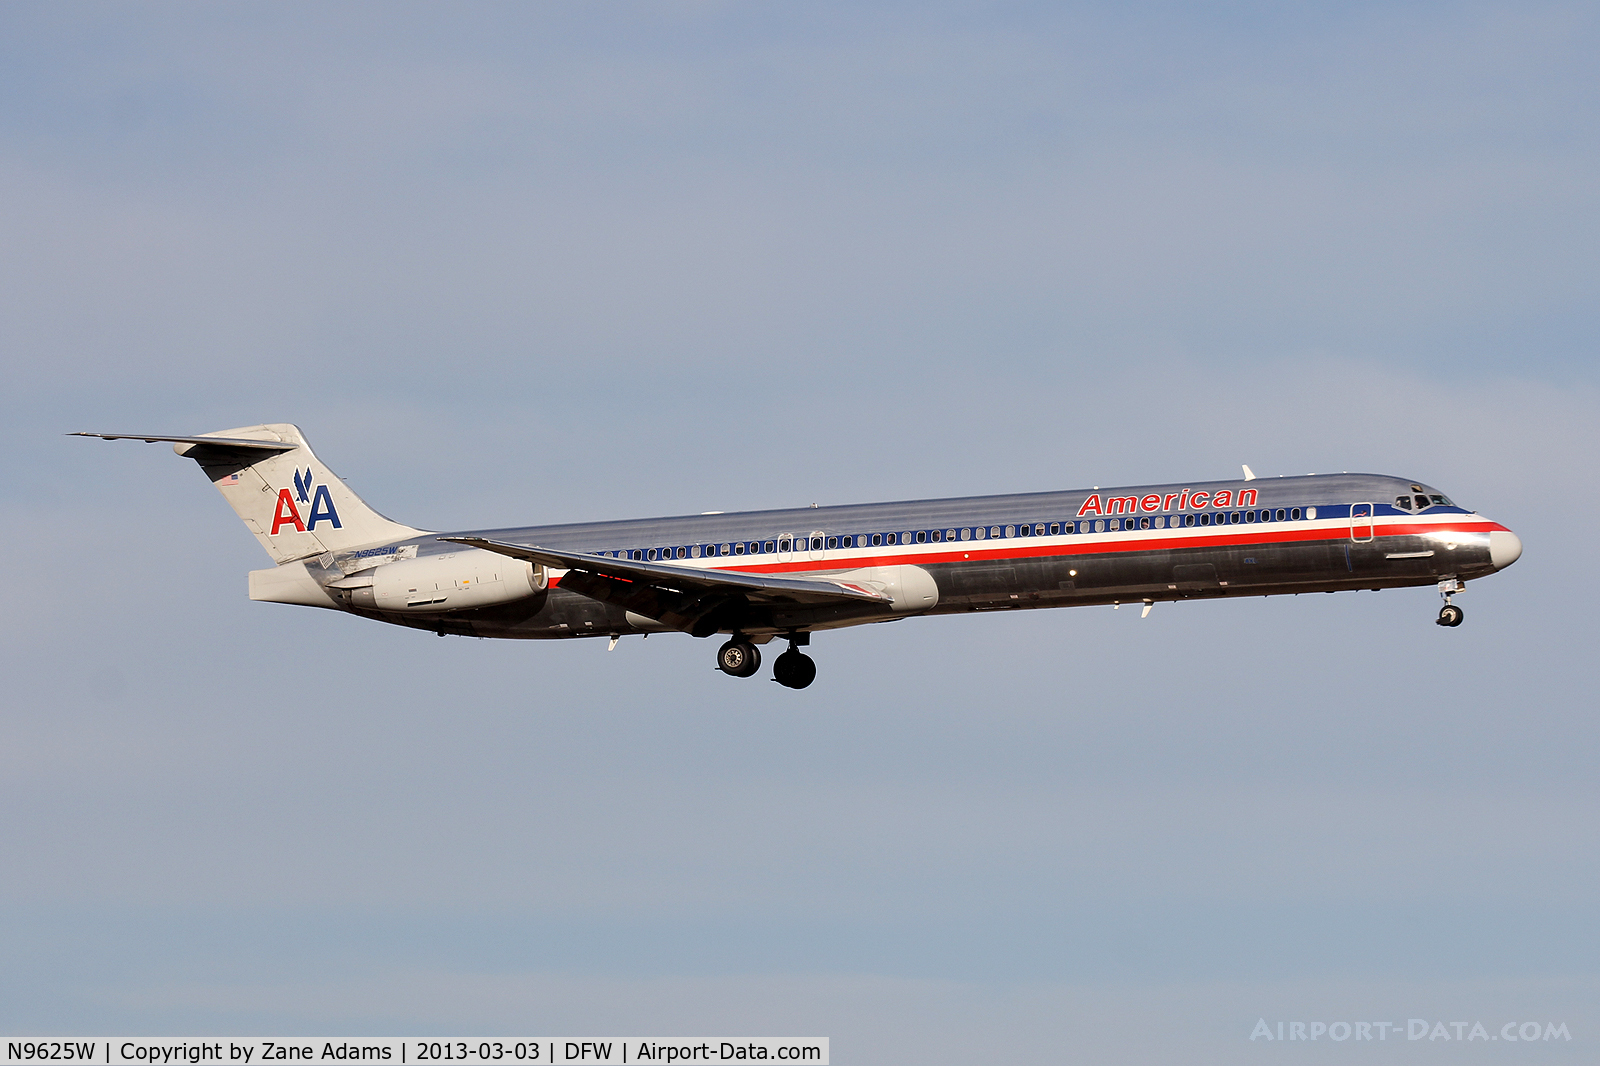 N9625W, 1998 McDonnell Douglas MD-83 (DC-9-83) C/N 53595, American Airlines at DFW Airport